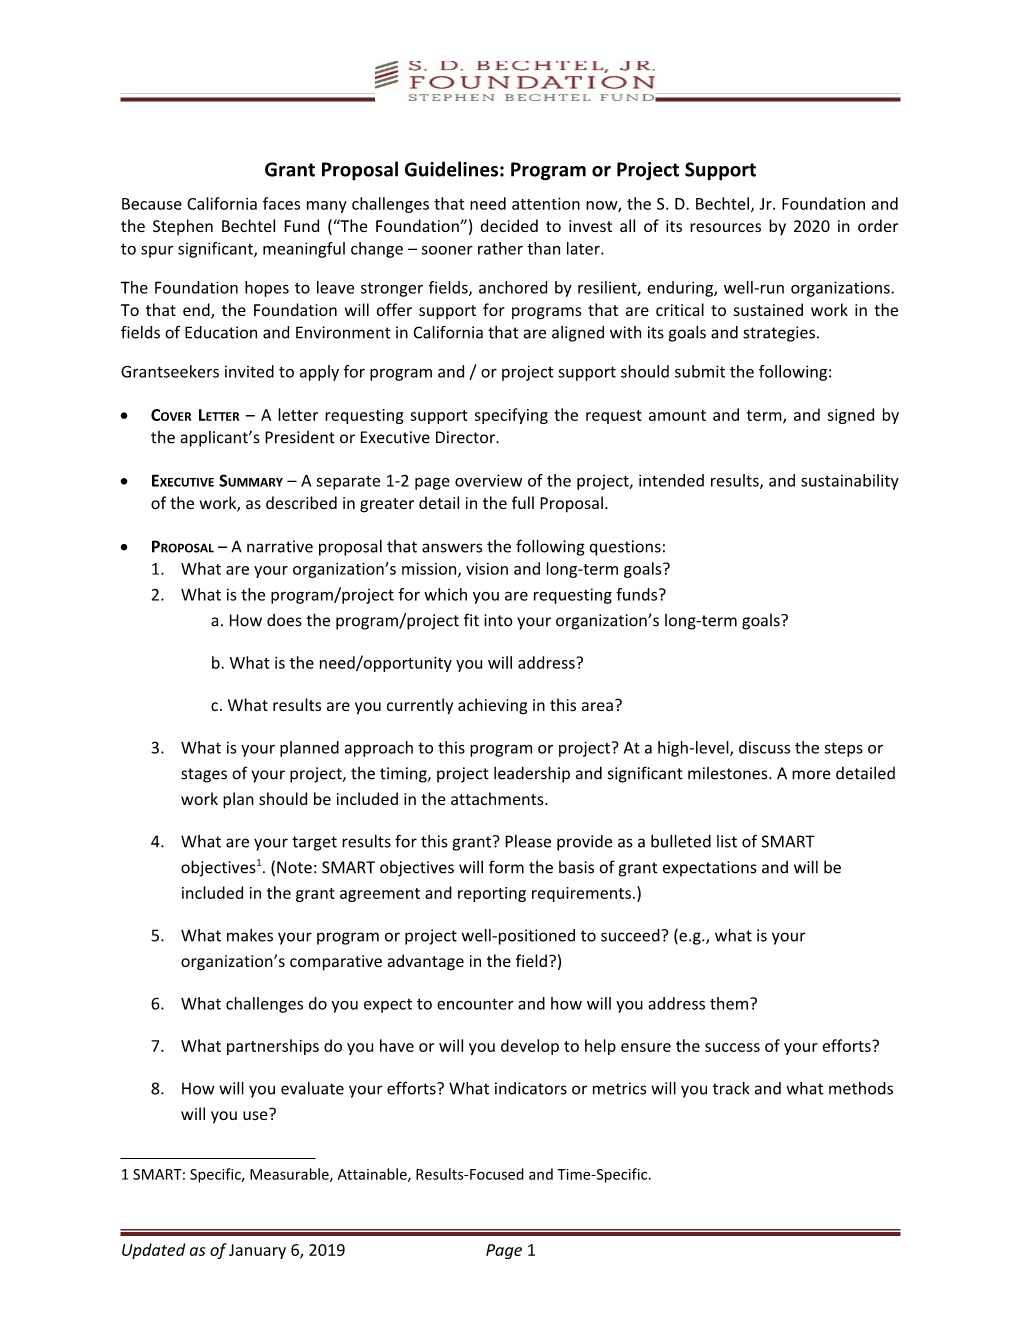 Grant Proposal Guidelines: Program Or Project Support